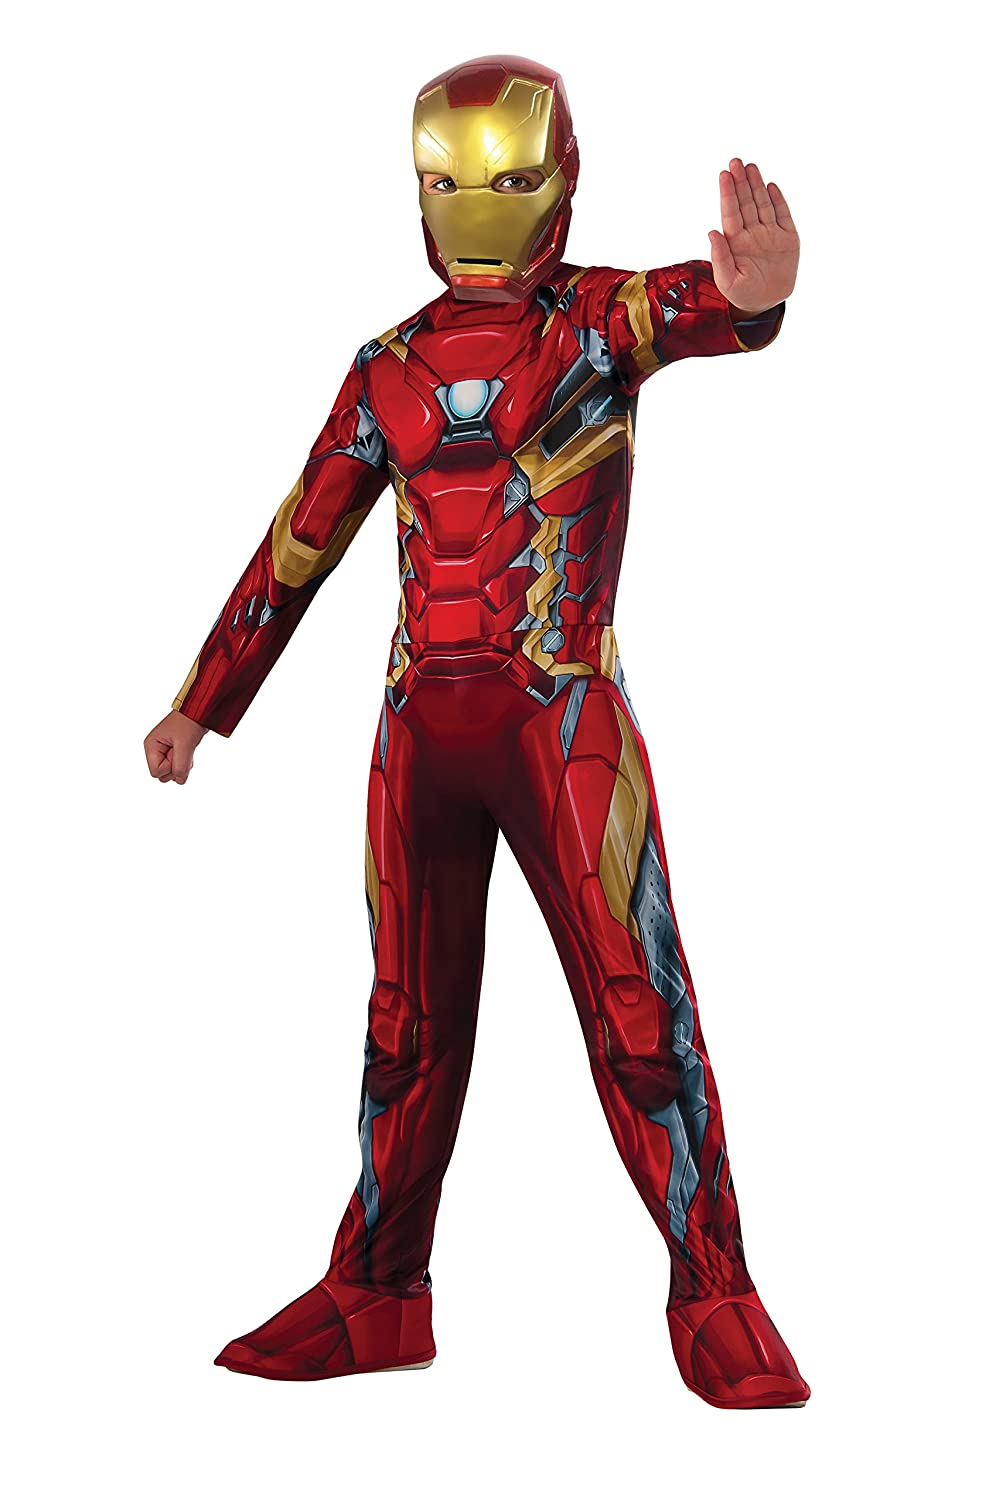 21 Best Children's Iron Man Costume 2022 - Review & Buying Guide 1